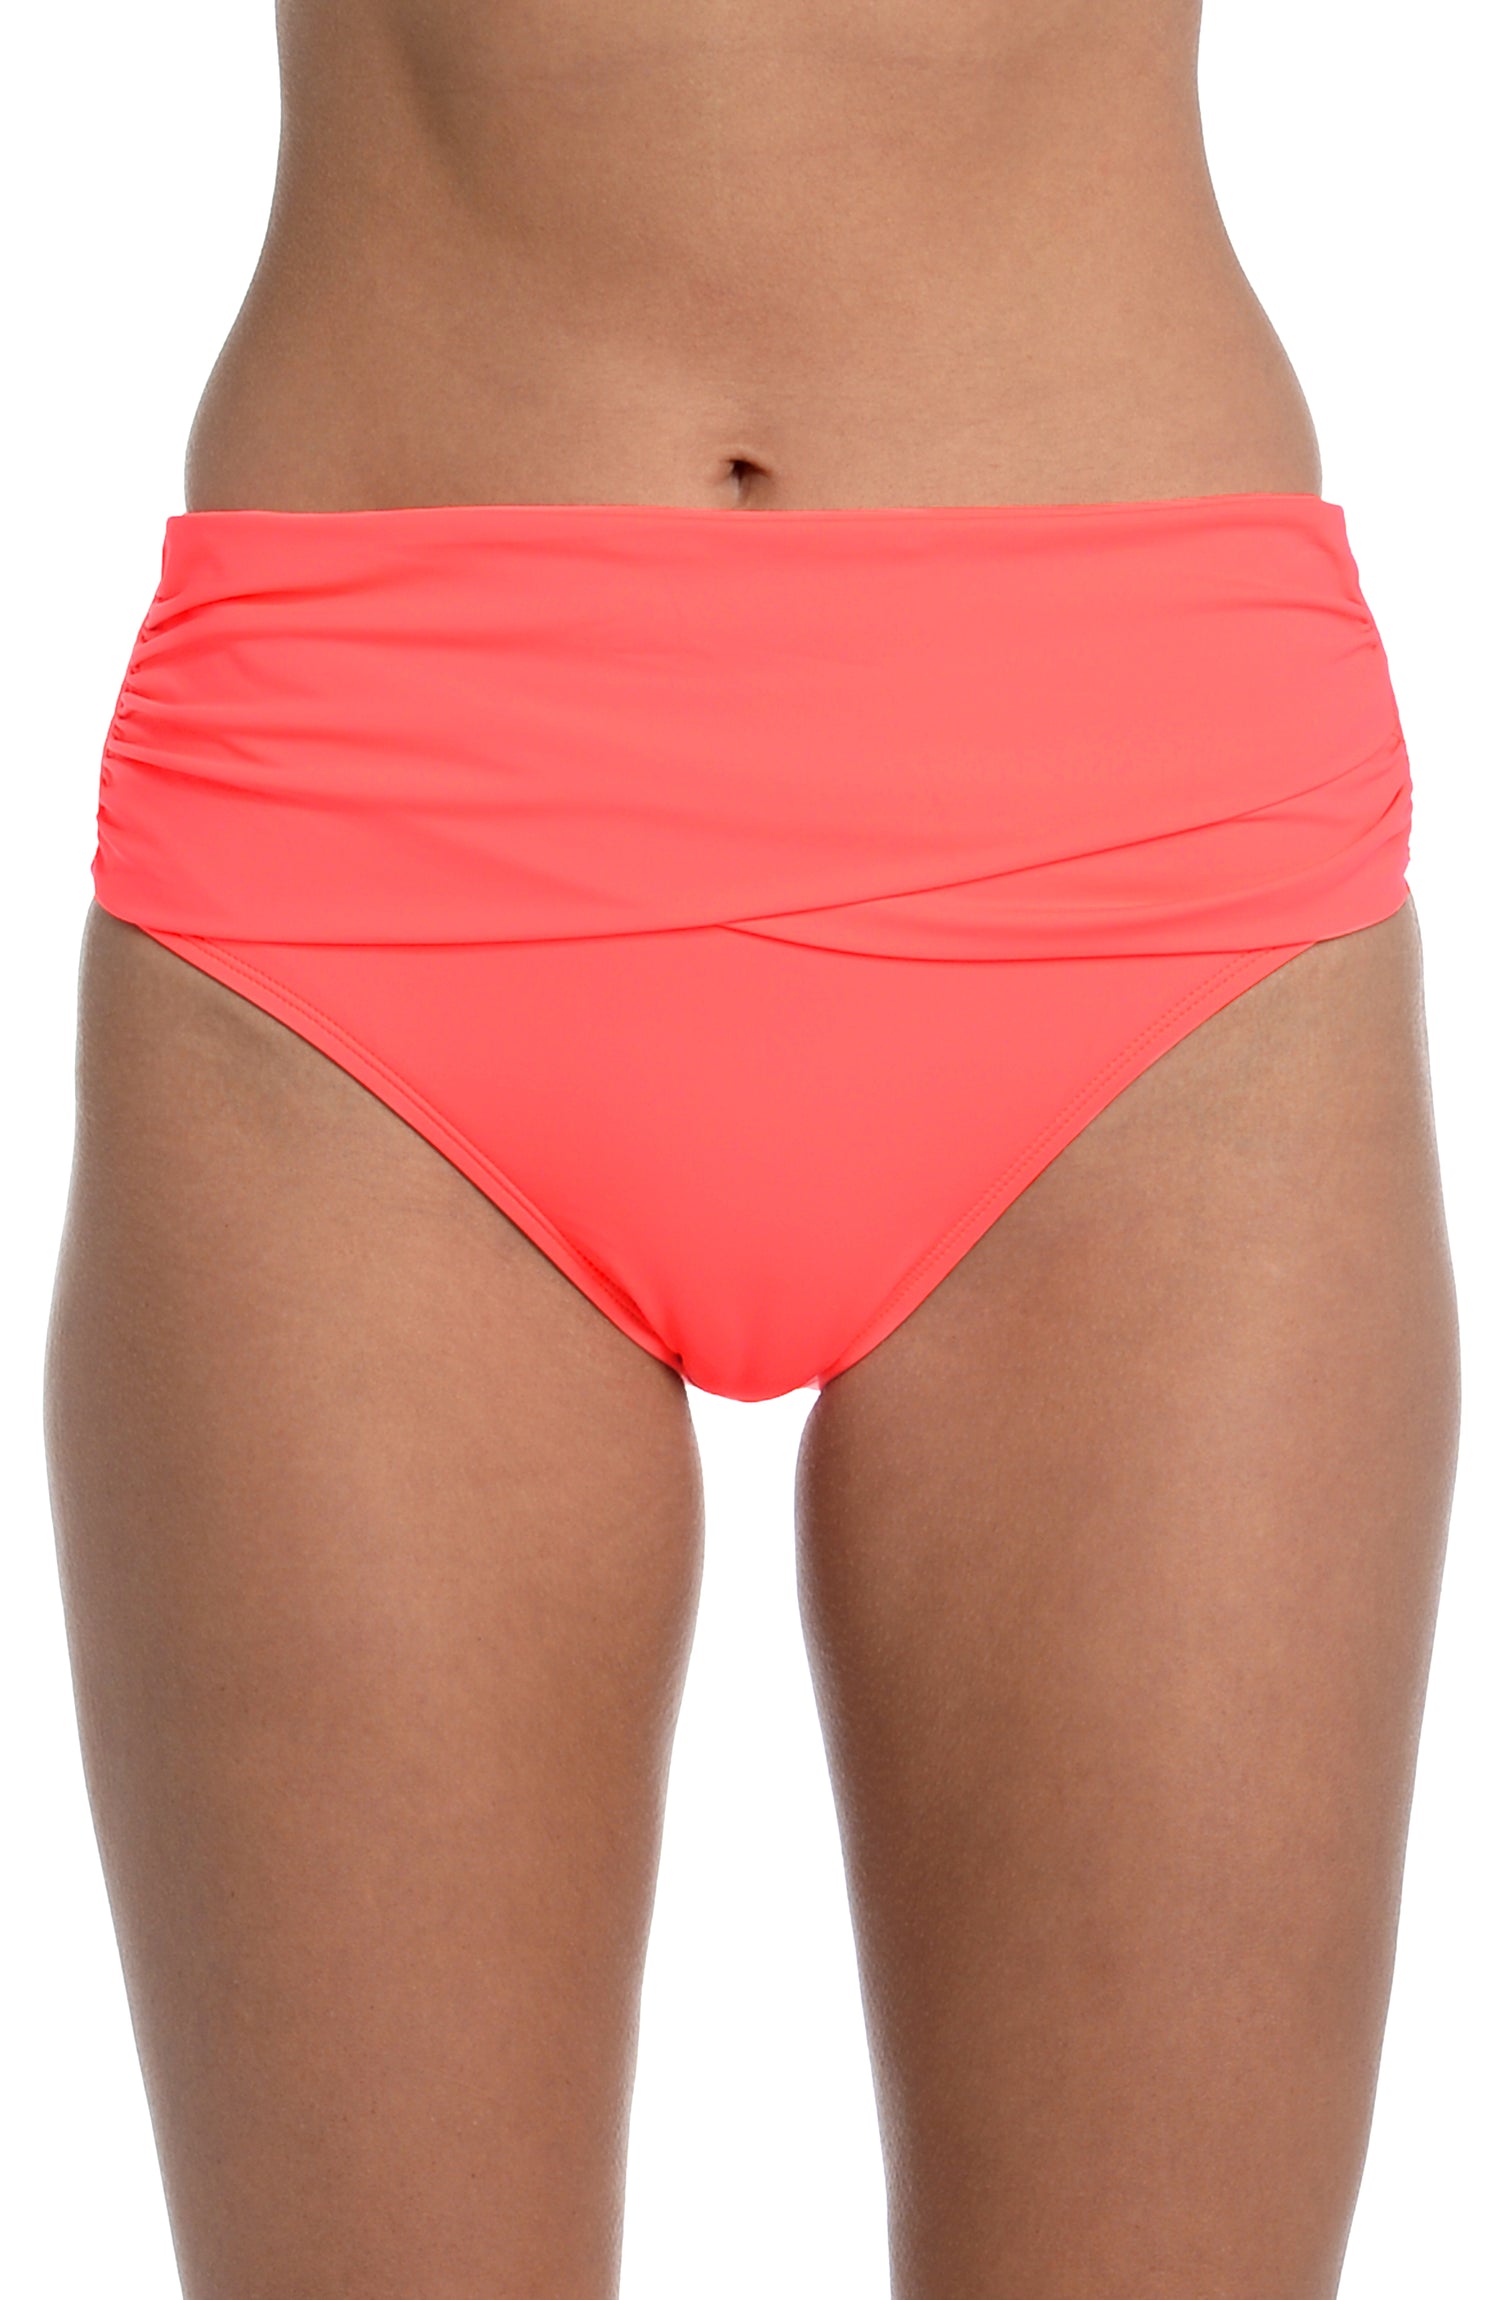 Model is wearing a hot coral colored mid-waist swimsuit bottom from our Best-Selling Island Goddess collection.